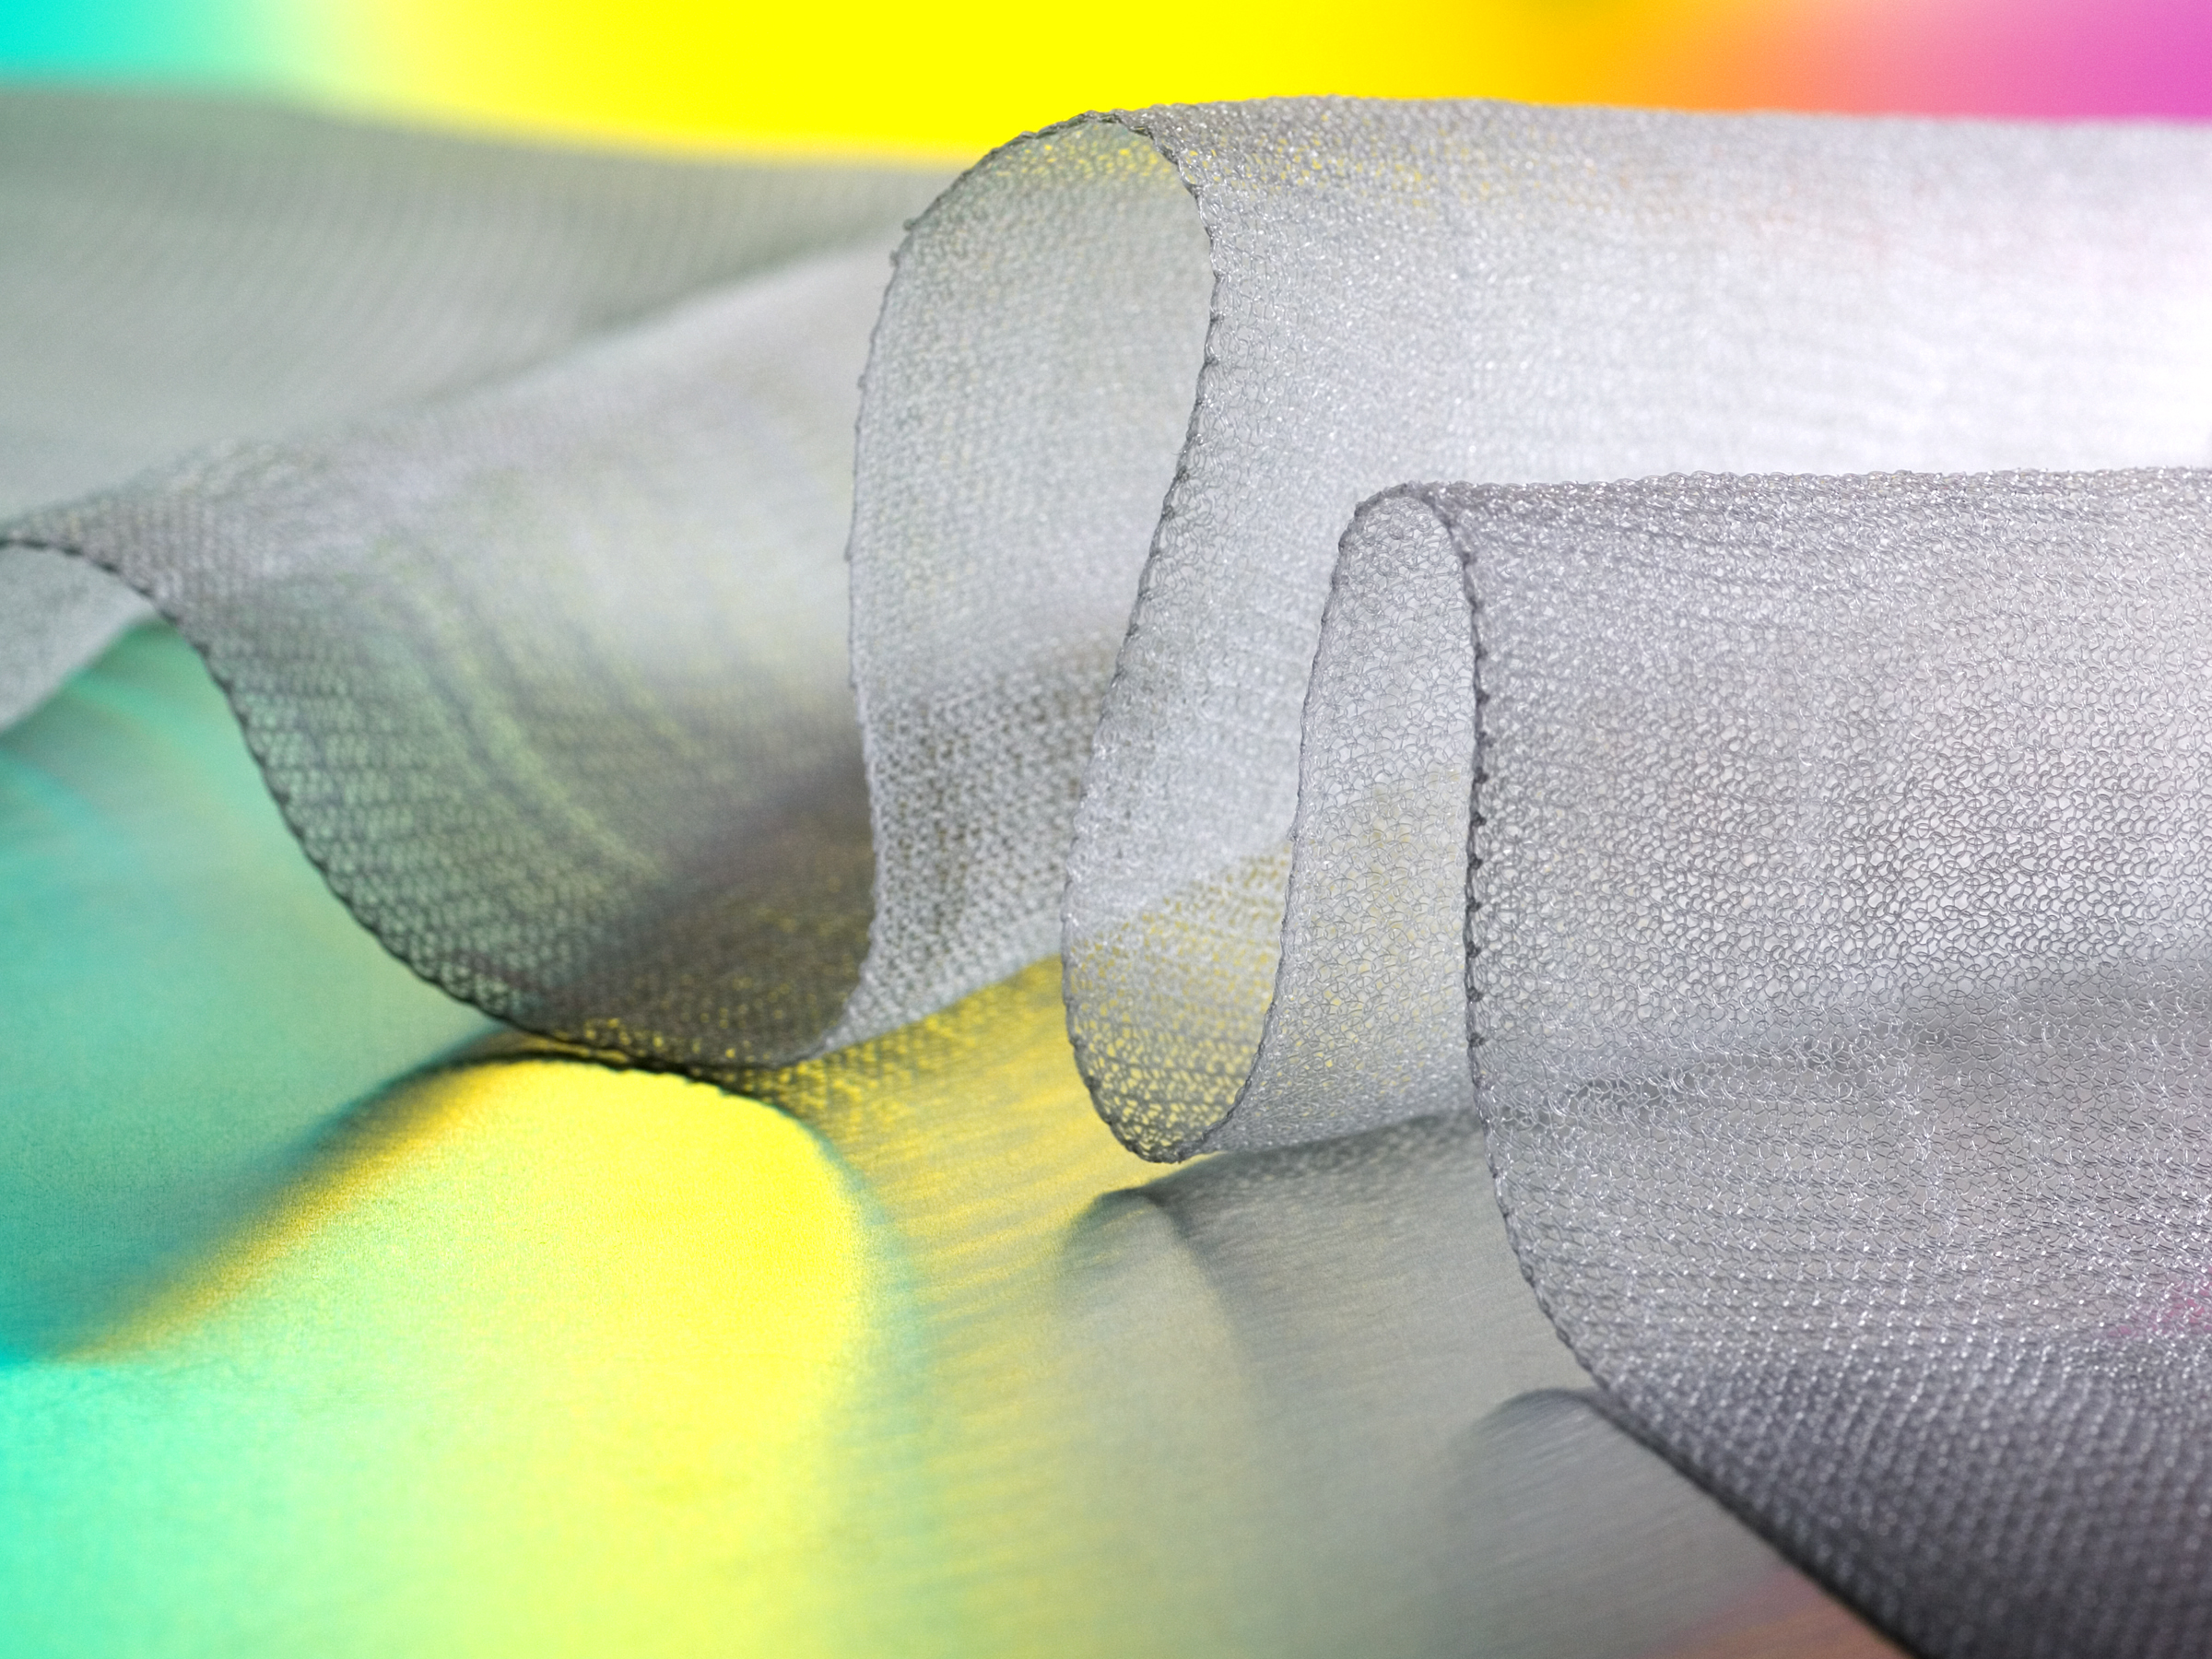 TephaFLEX Surgical Mesh made from knitted filaments of TephaFLEX absorbable biopolymer.